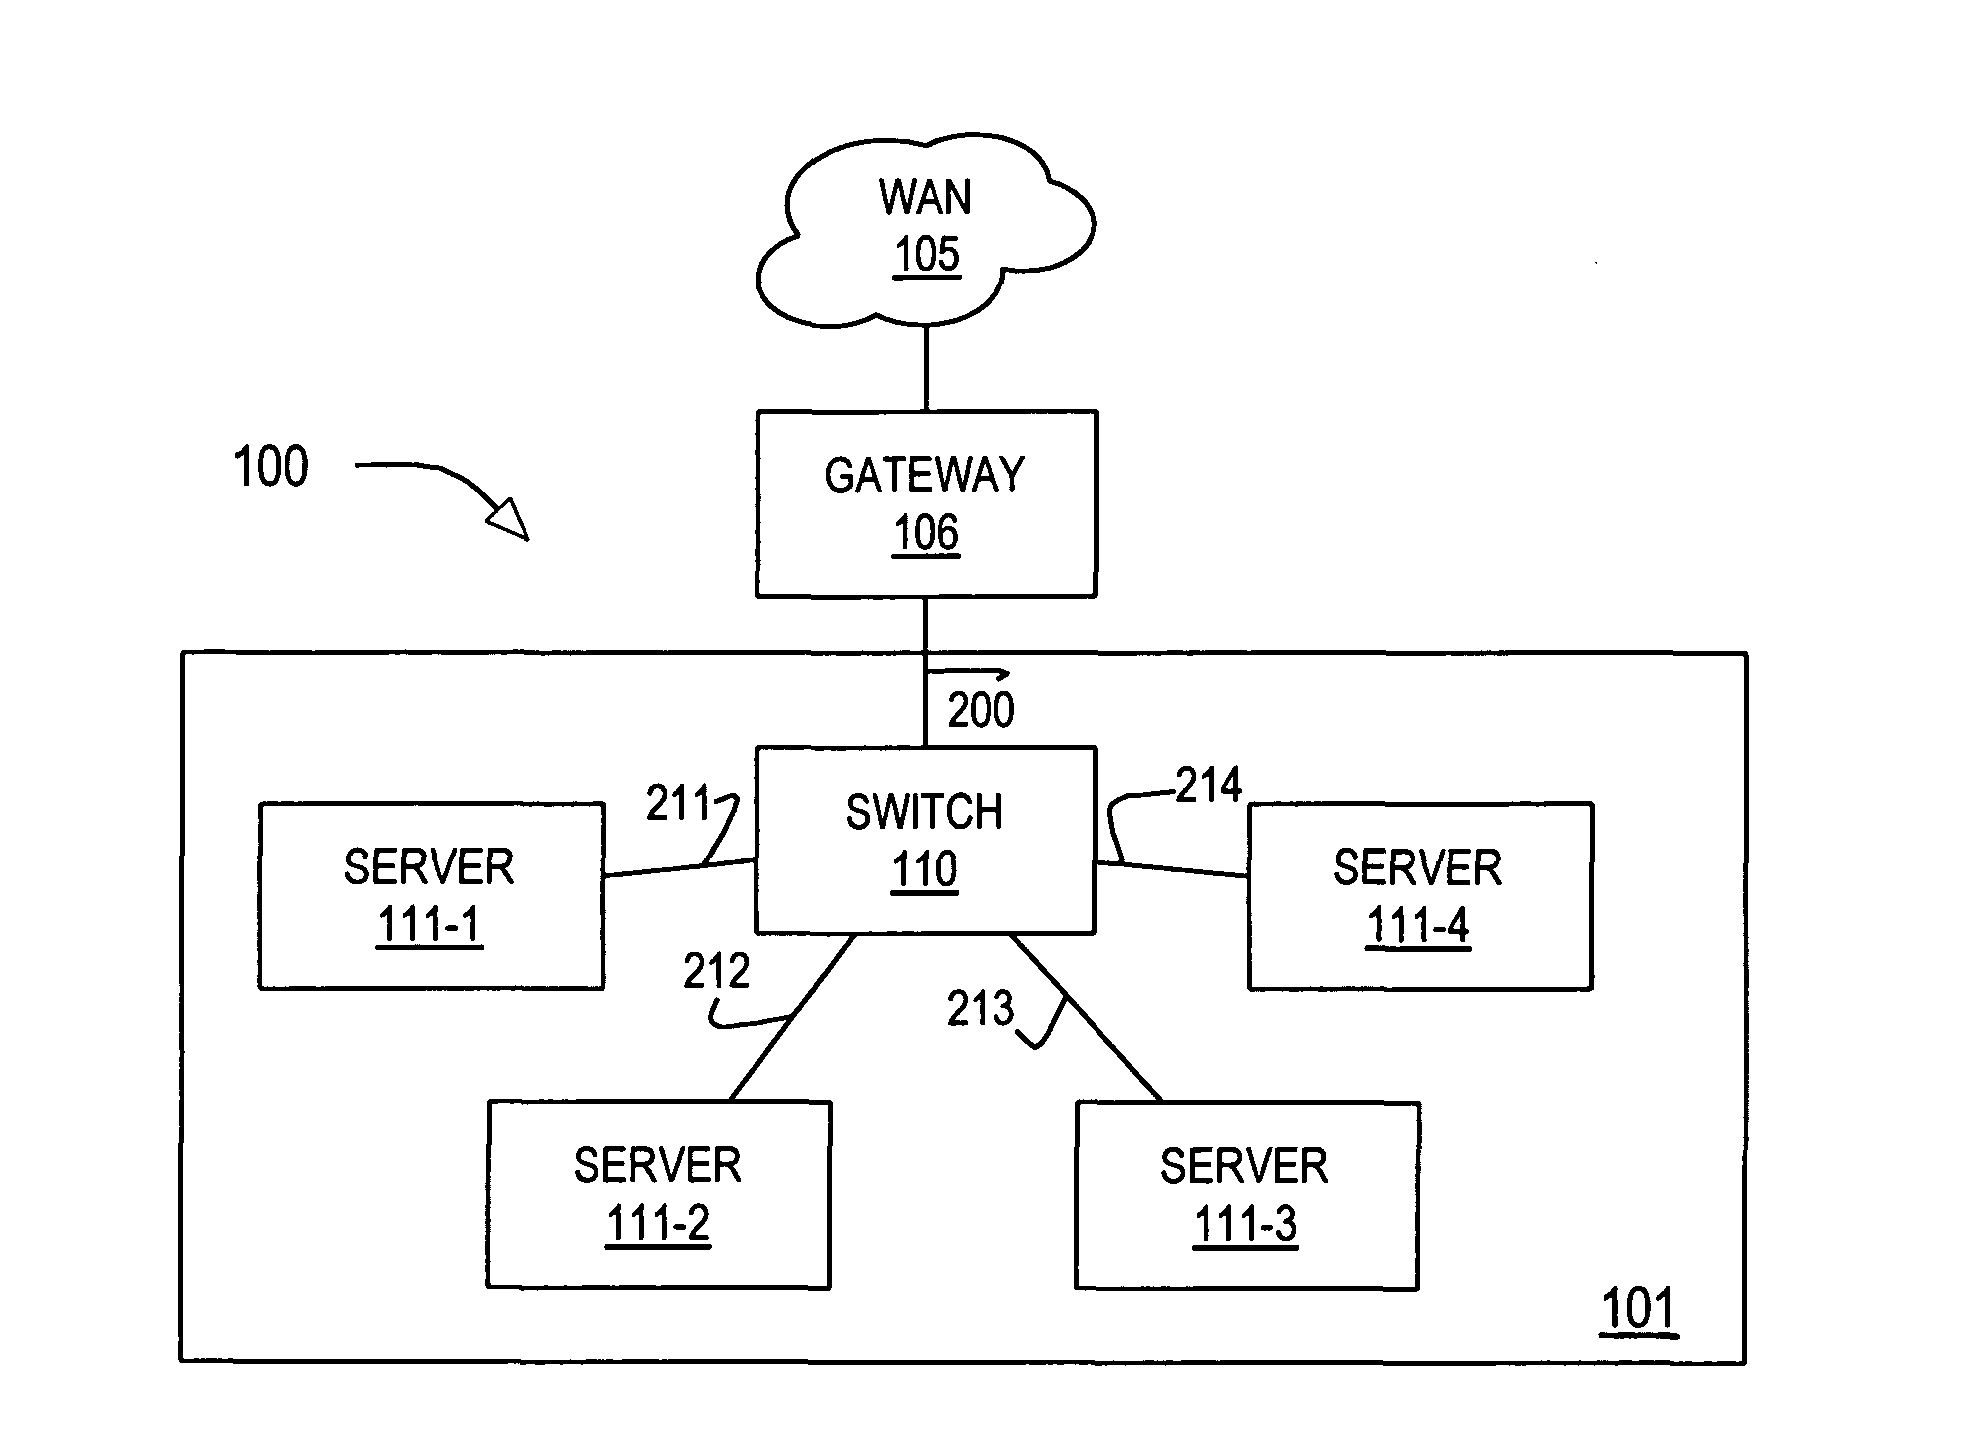 Conserving energy in a data processing network